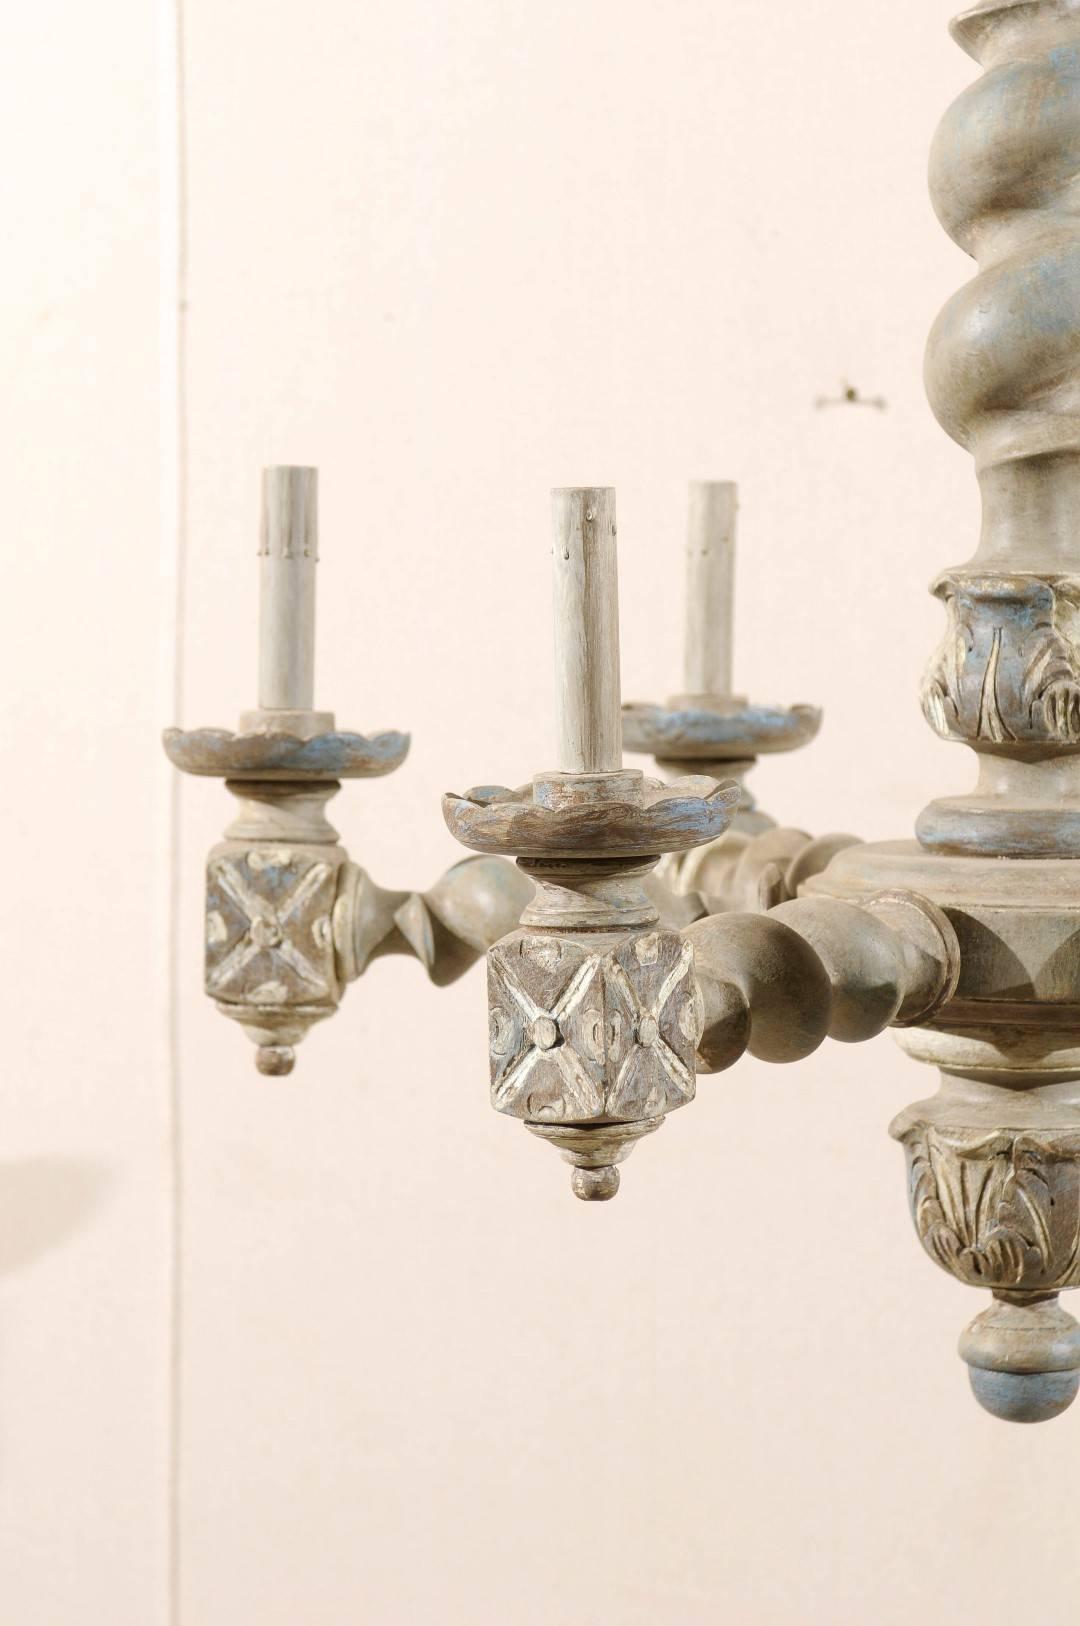 French Six-Light Barley Twist Chandelier with Central Column and Acanthus Leaves 2